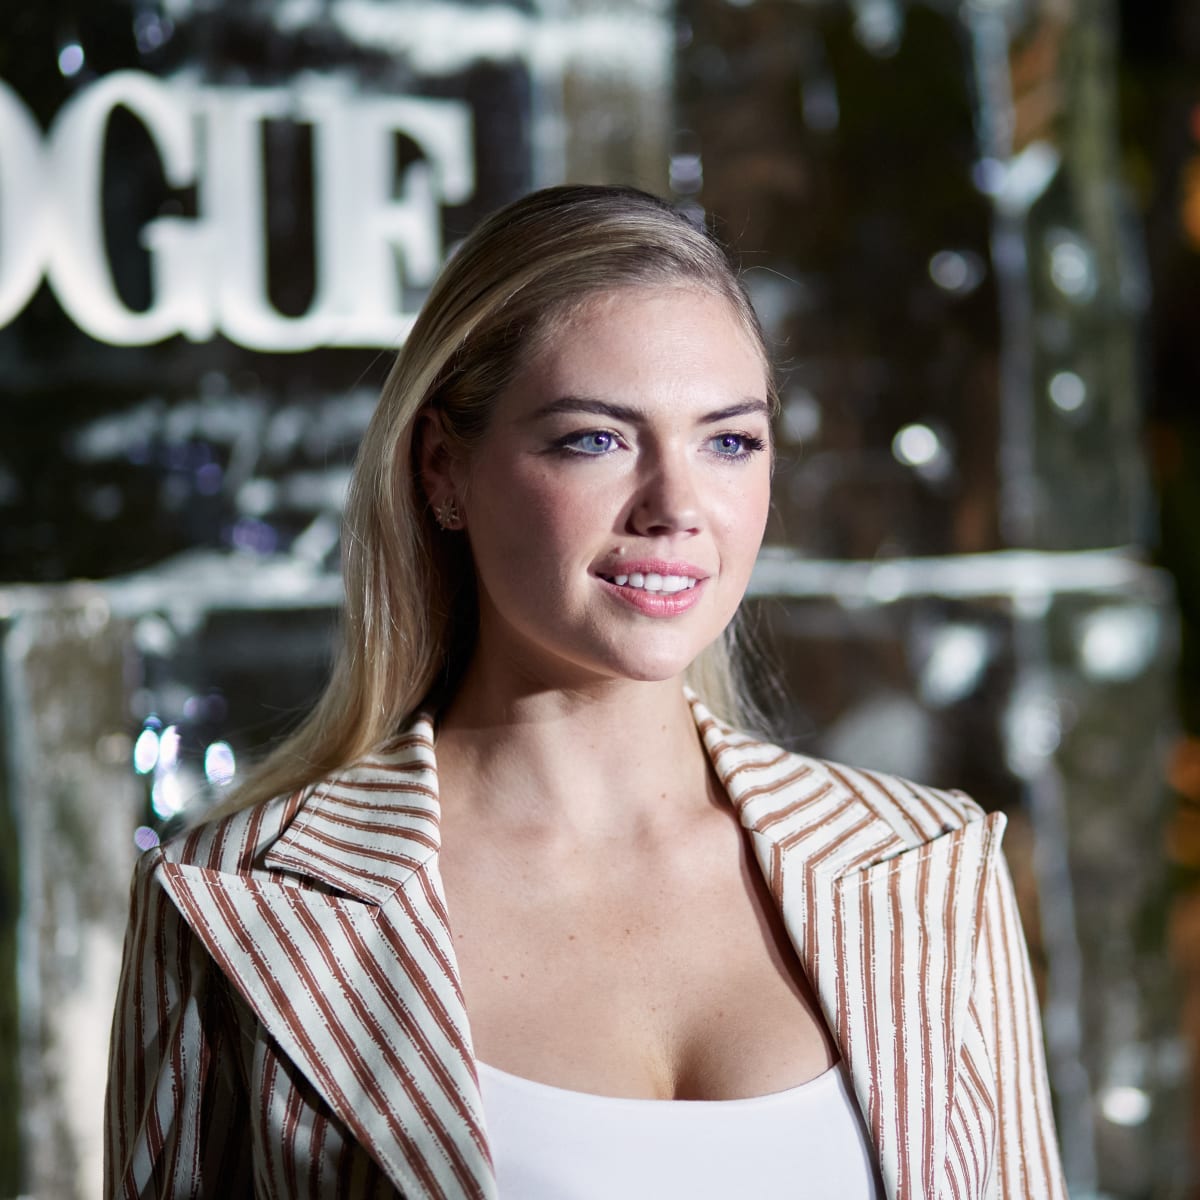 5 Favorite Swimsuit Photos Of Legendary Model Kate Upton - The Spun: What's  Trending In The Sports World Today